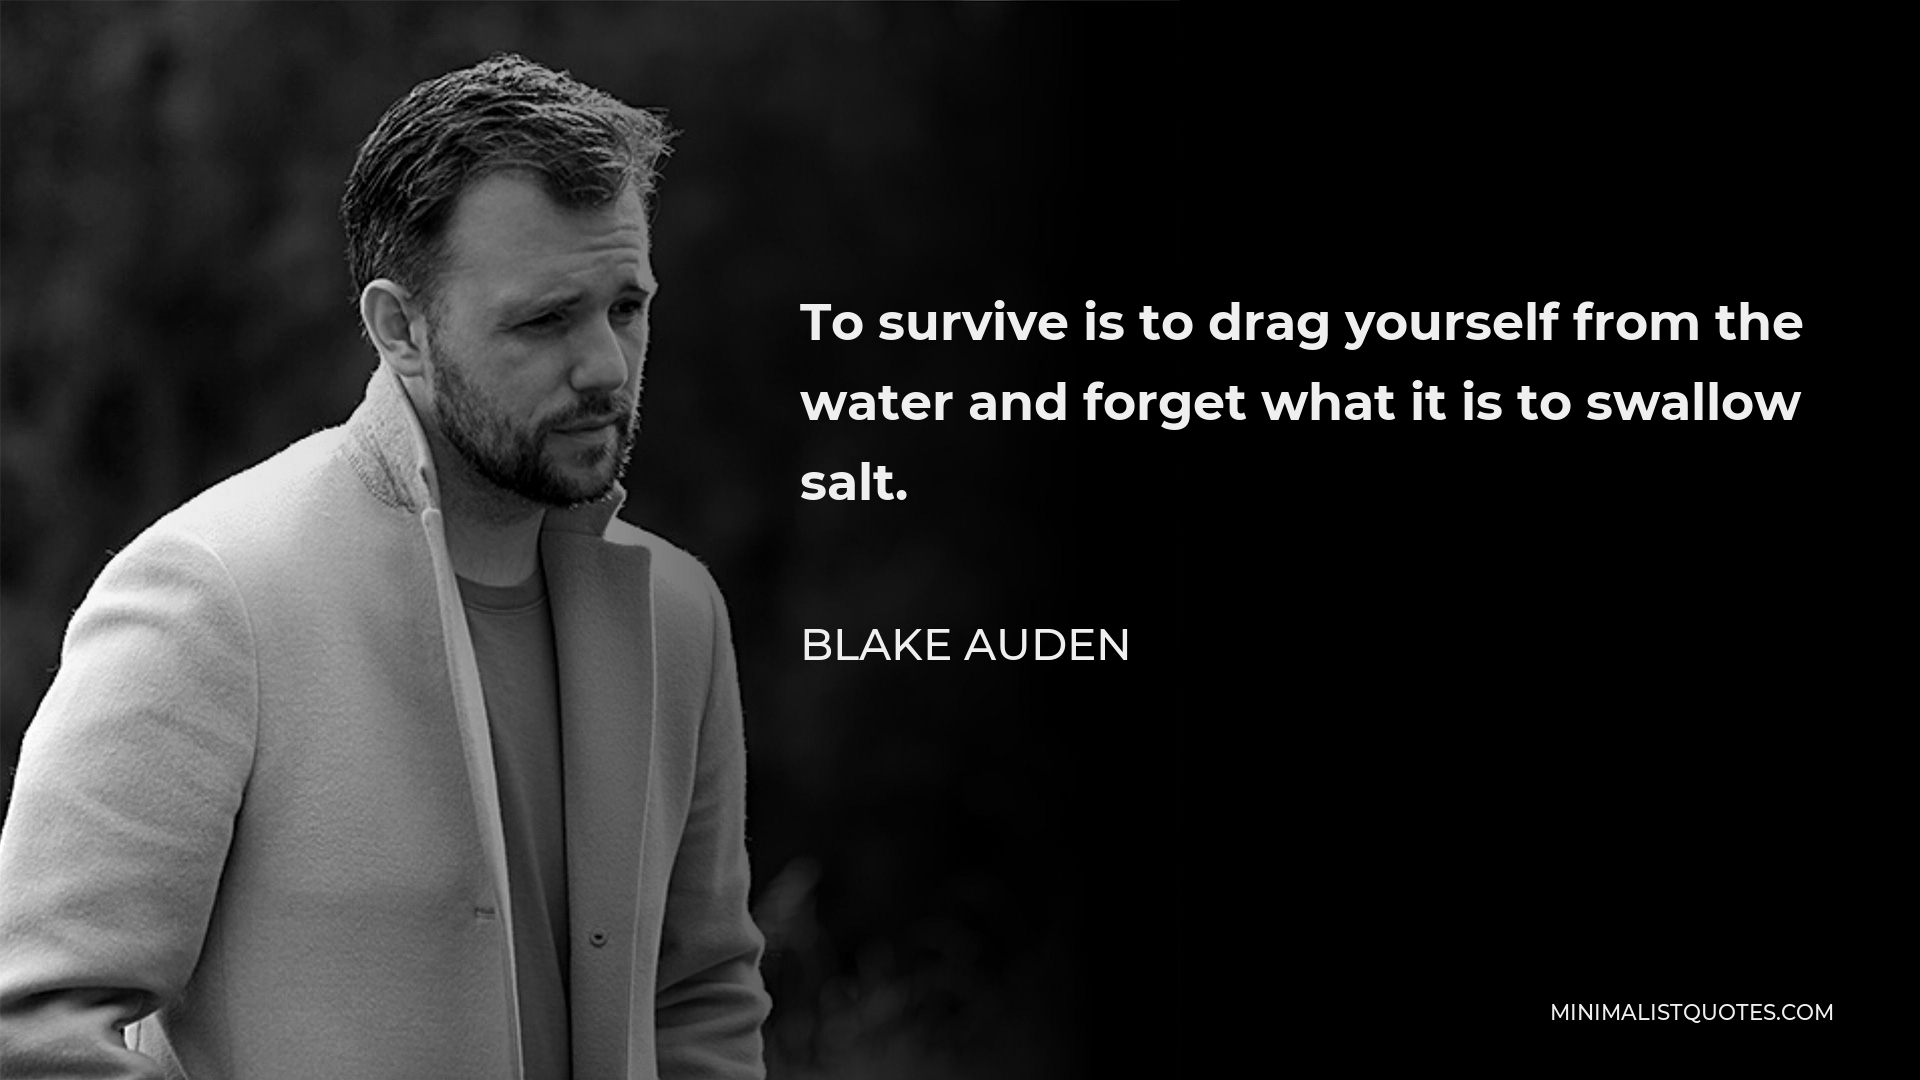 Blake Auden Quote - To survive is to drag yourself from the water and forget what it is to swallow salt.